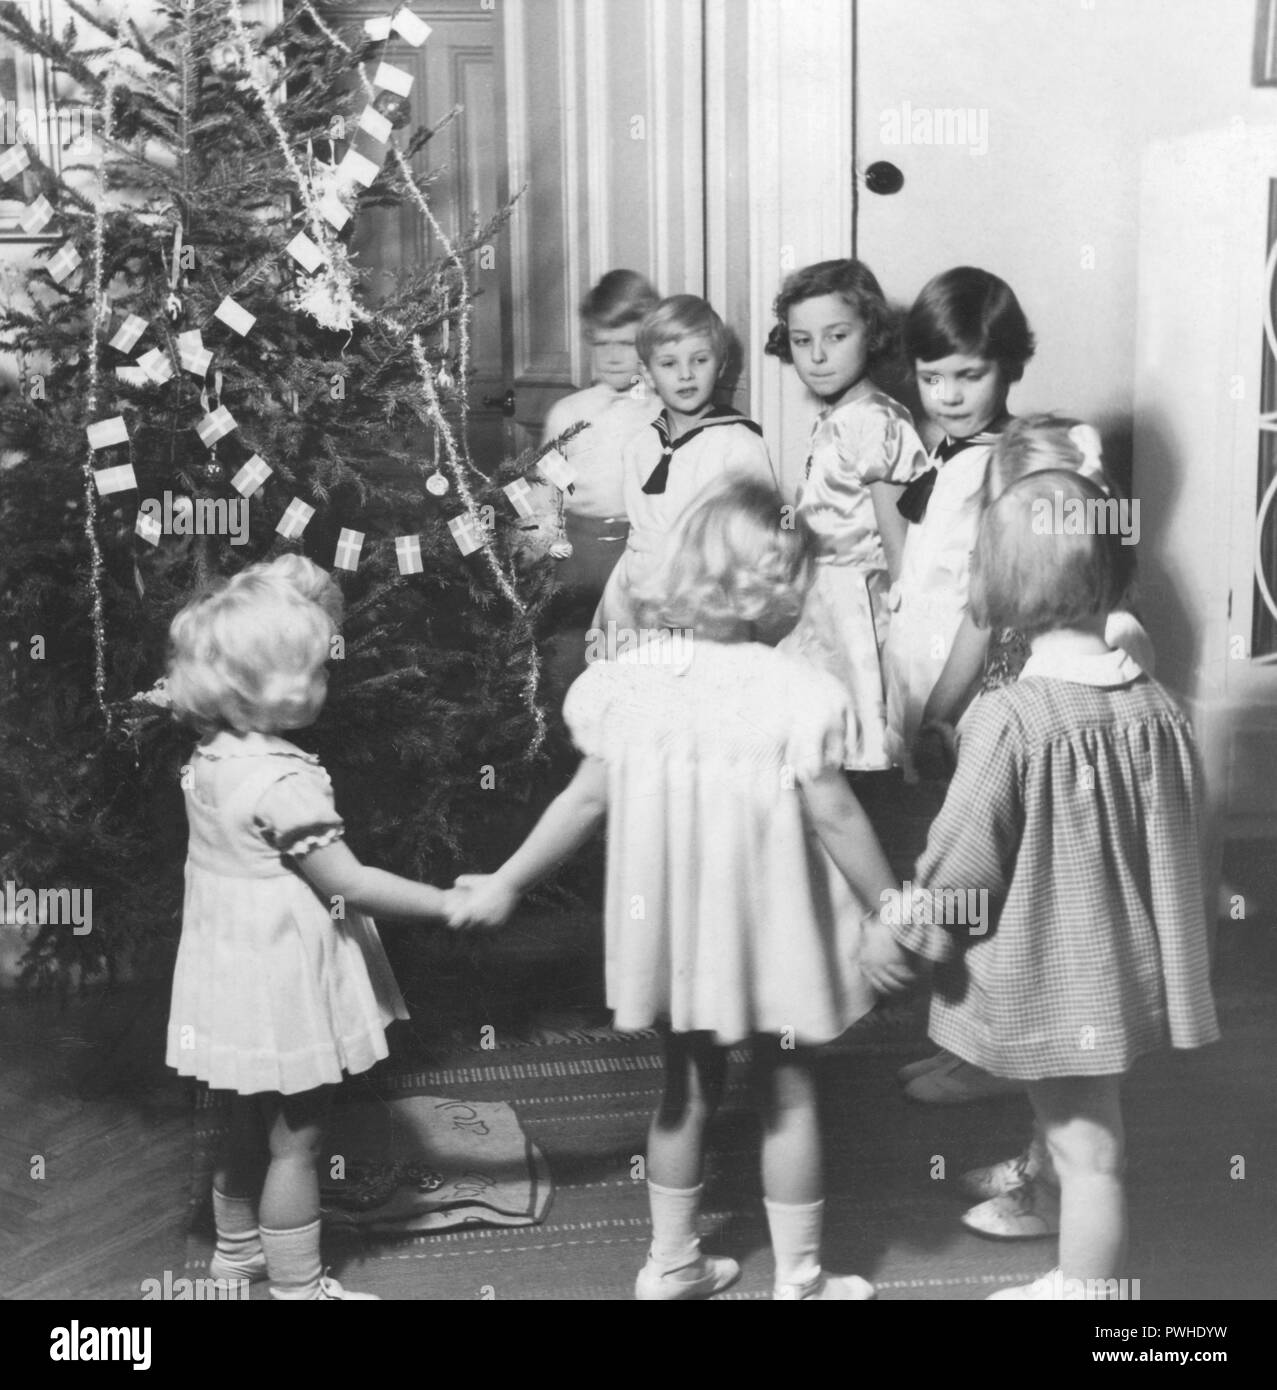 https://c8.alamy.com/comp/PWHDYW/christmas-in-the-1940s-children-are-dancing-around-the-christmas-tree-sweden-1947-PWHDYW.jpg